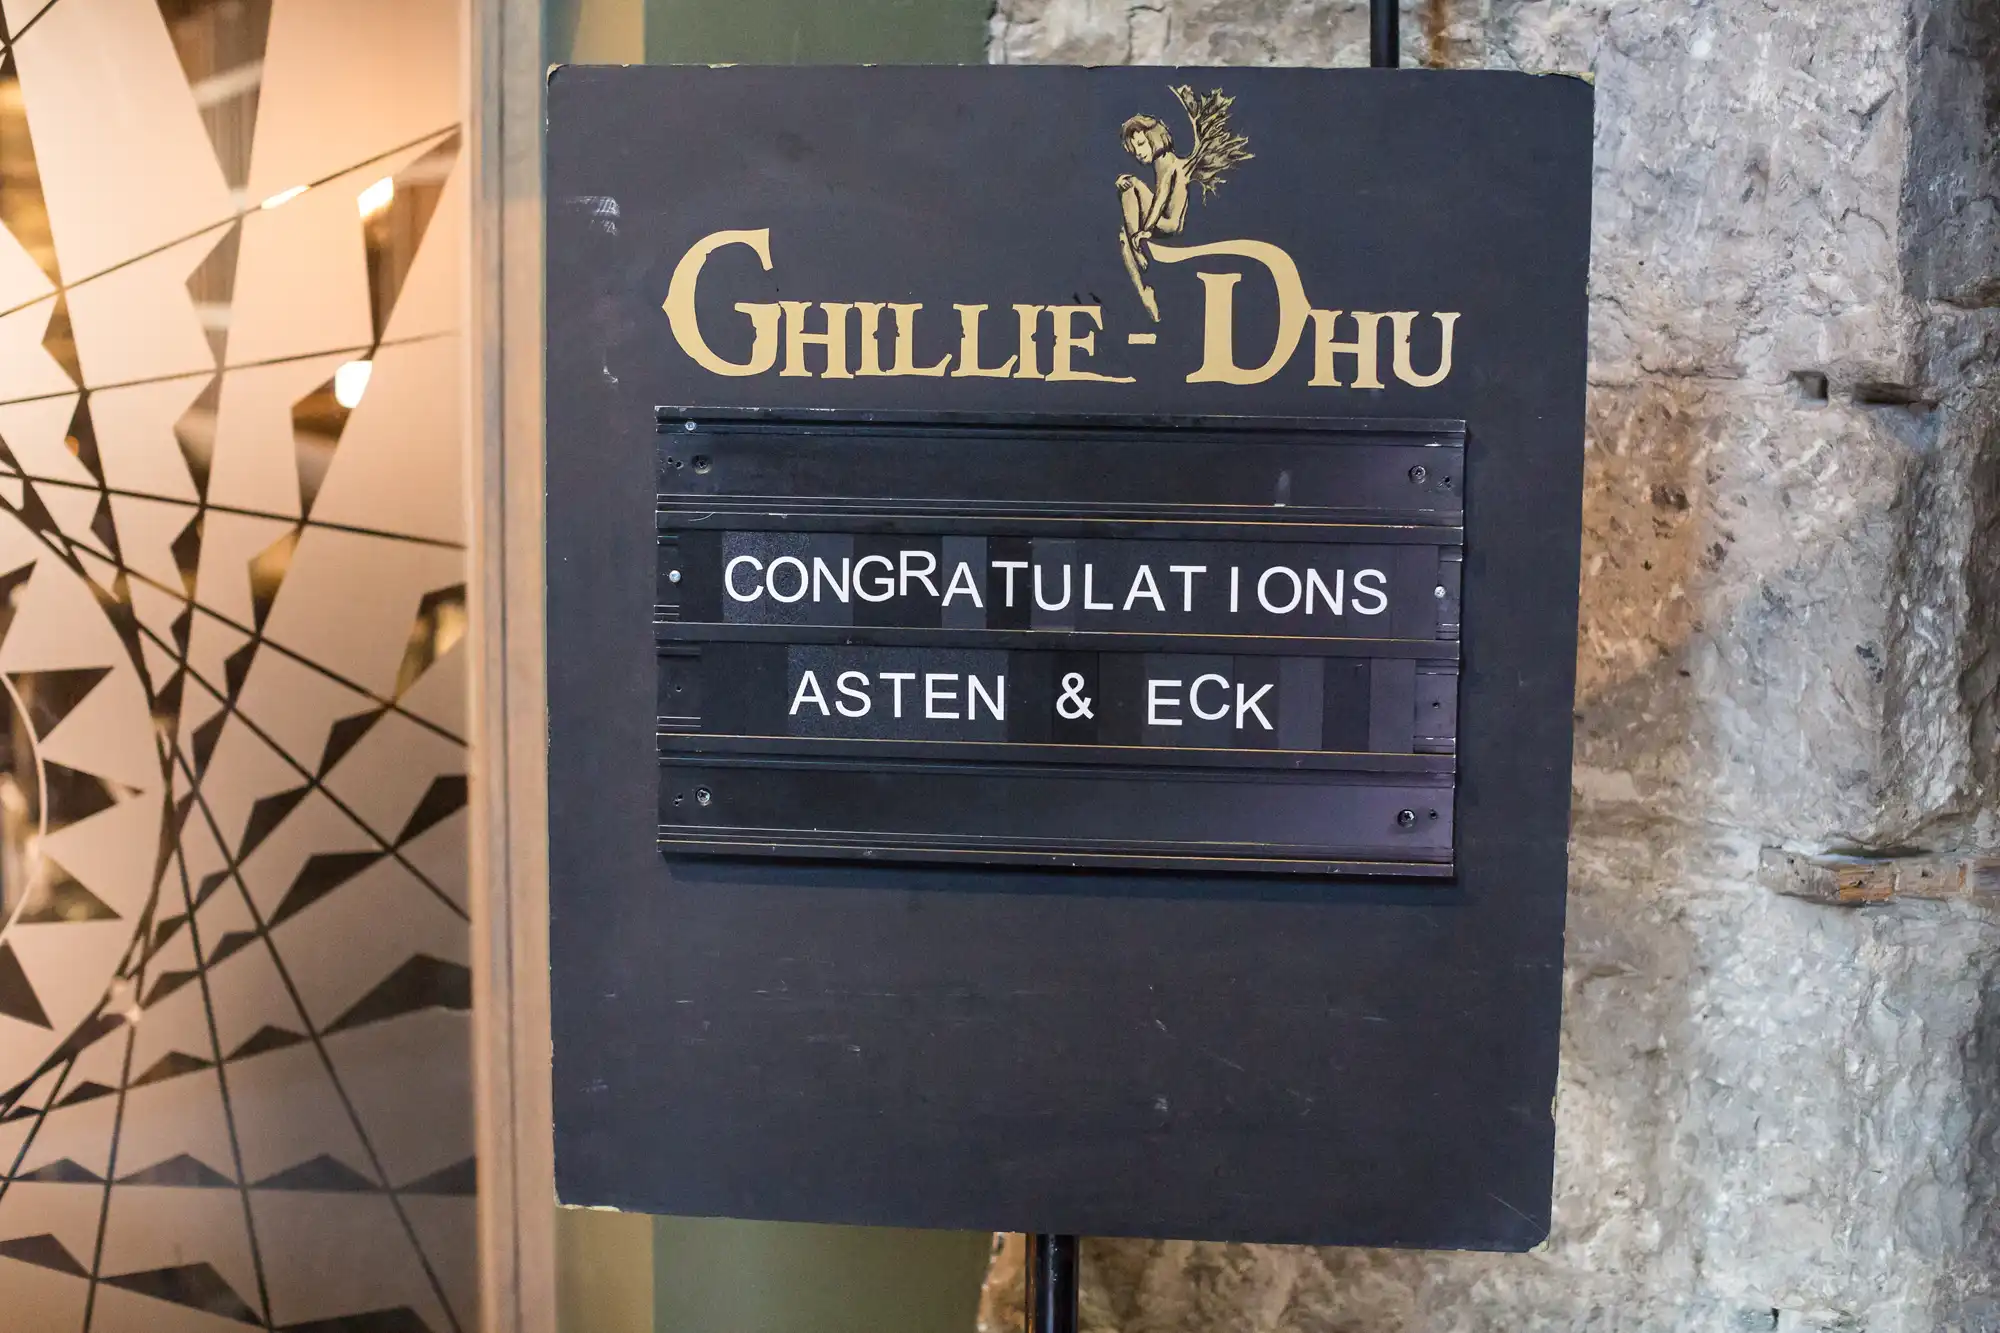 Signboard of ghillie-dhu pub displaying a message "congratulations asten & eck" in front of a textured wall.